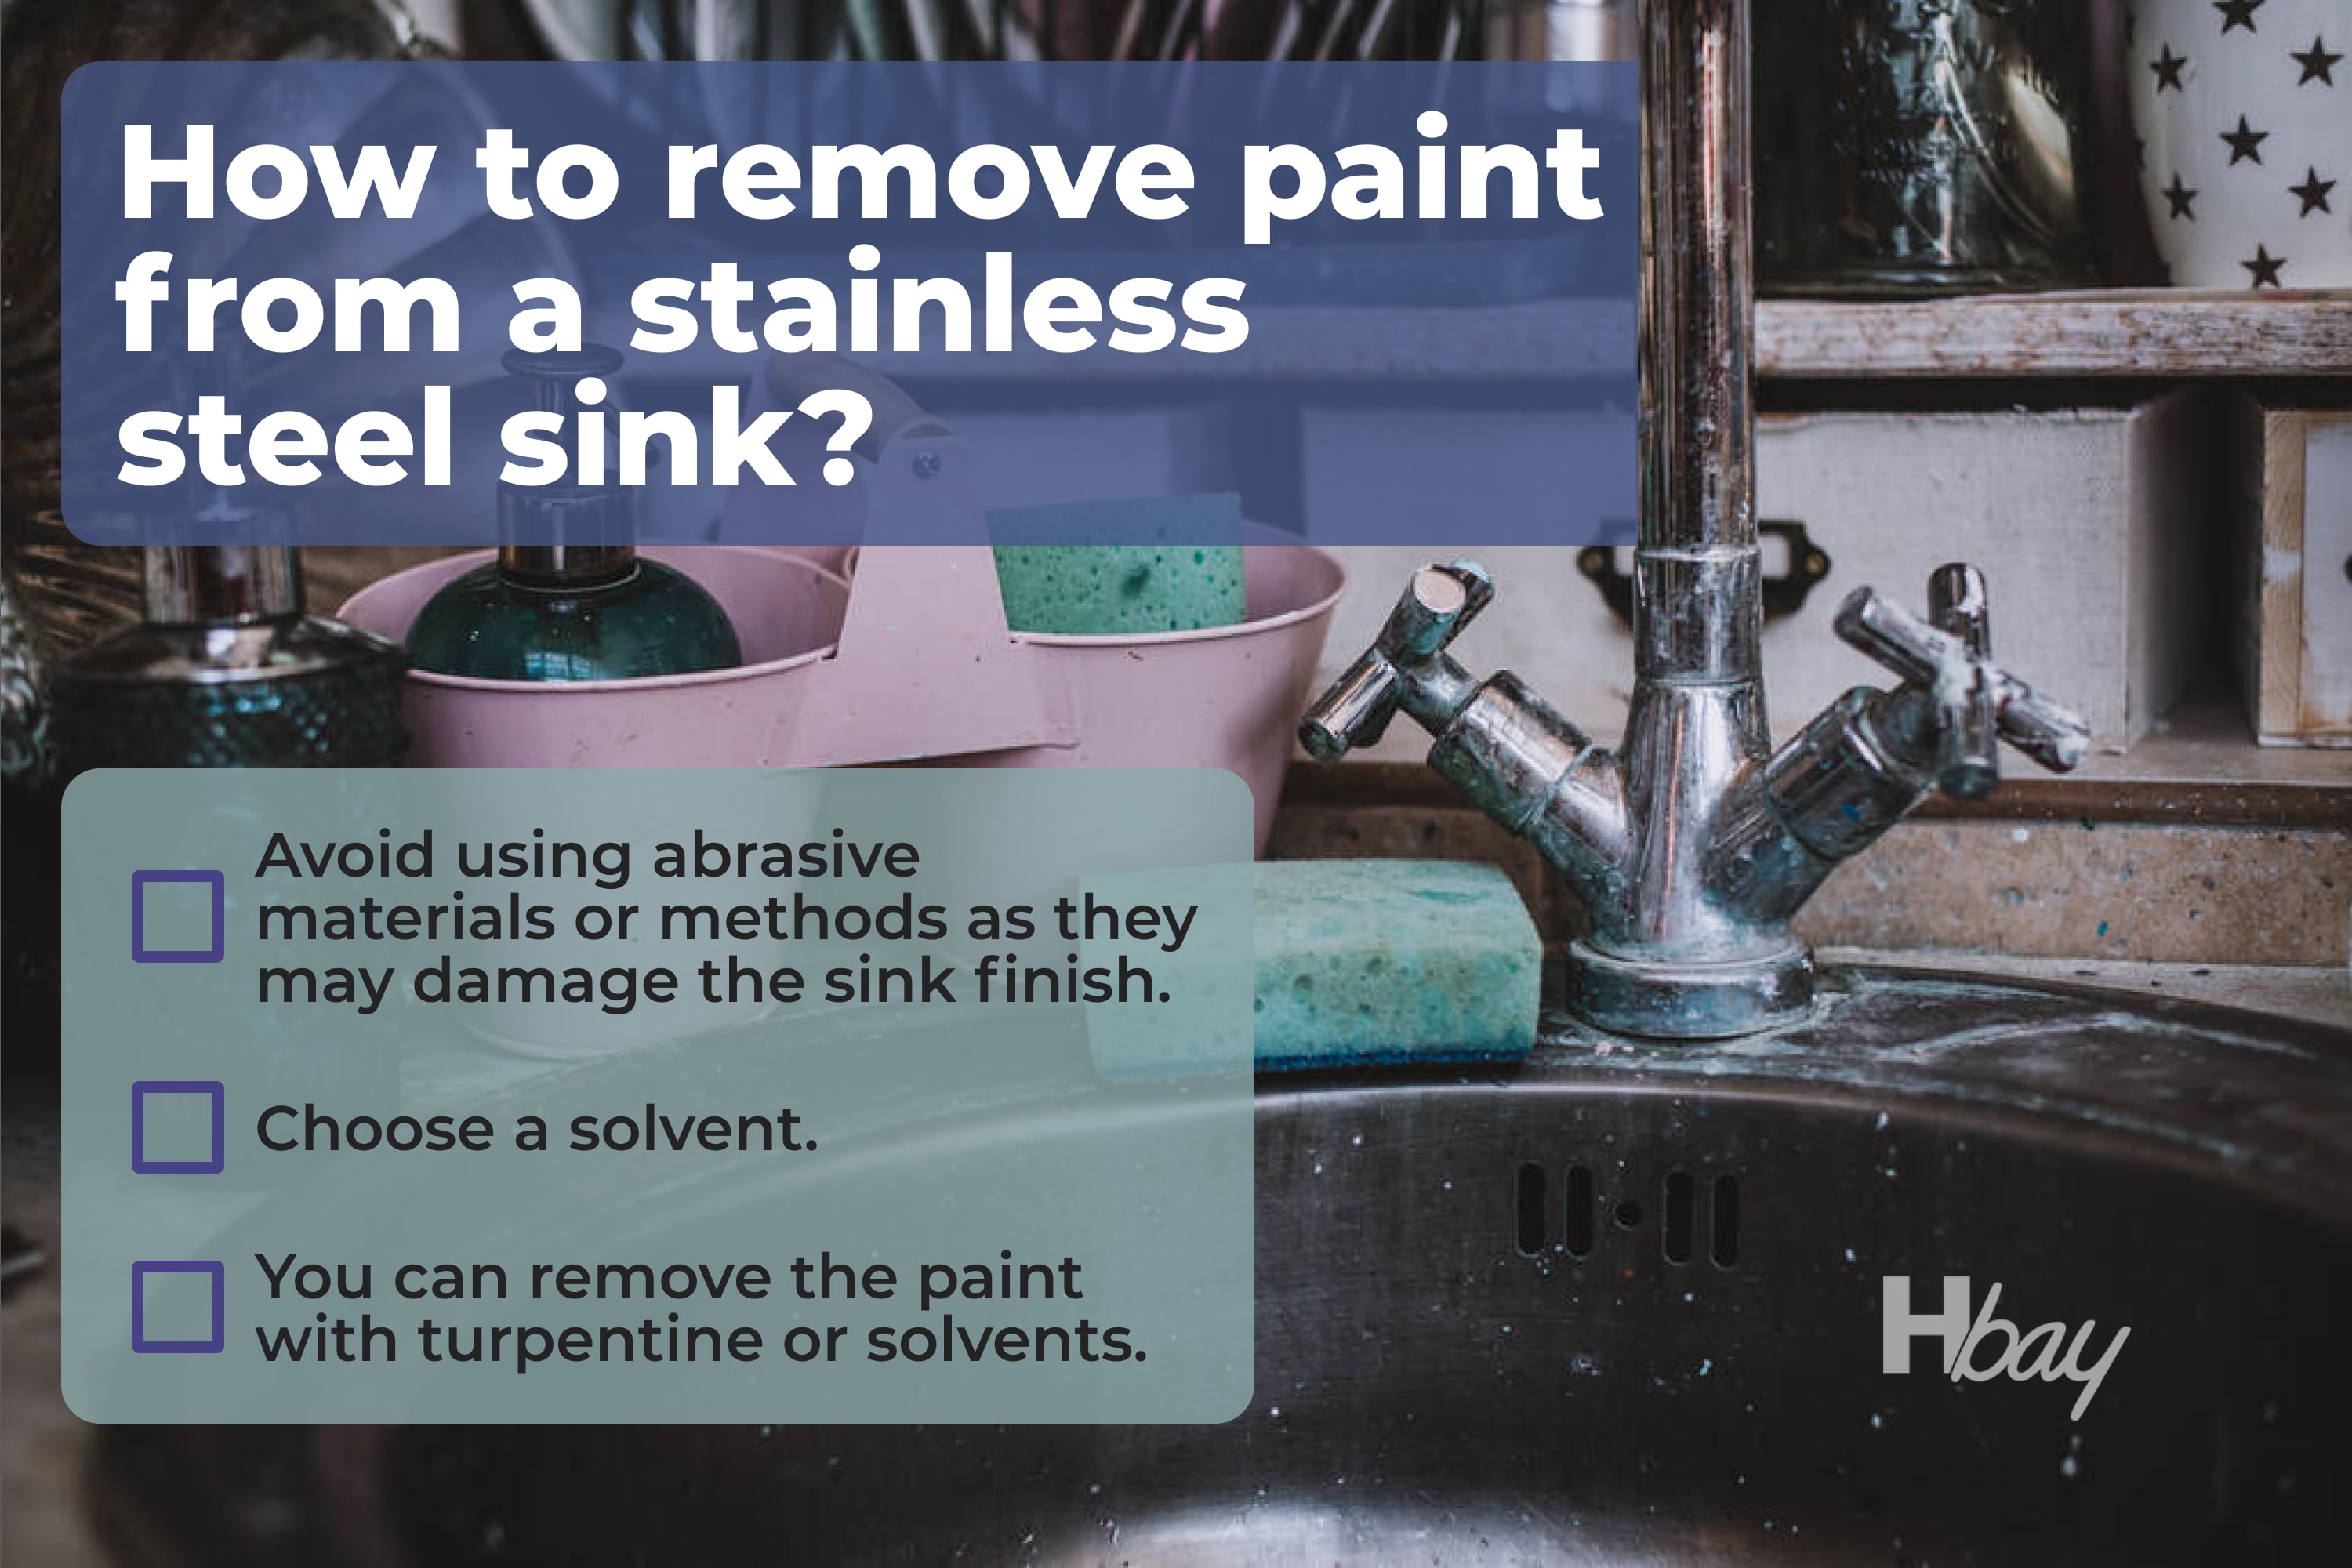 How to remove paint from a stainless steel sink